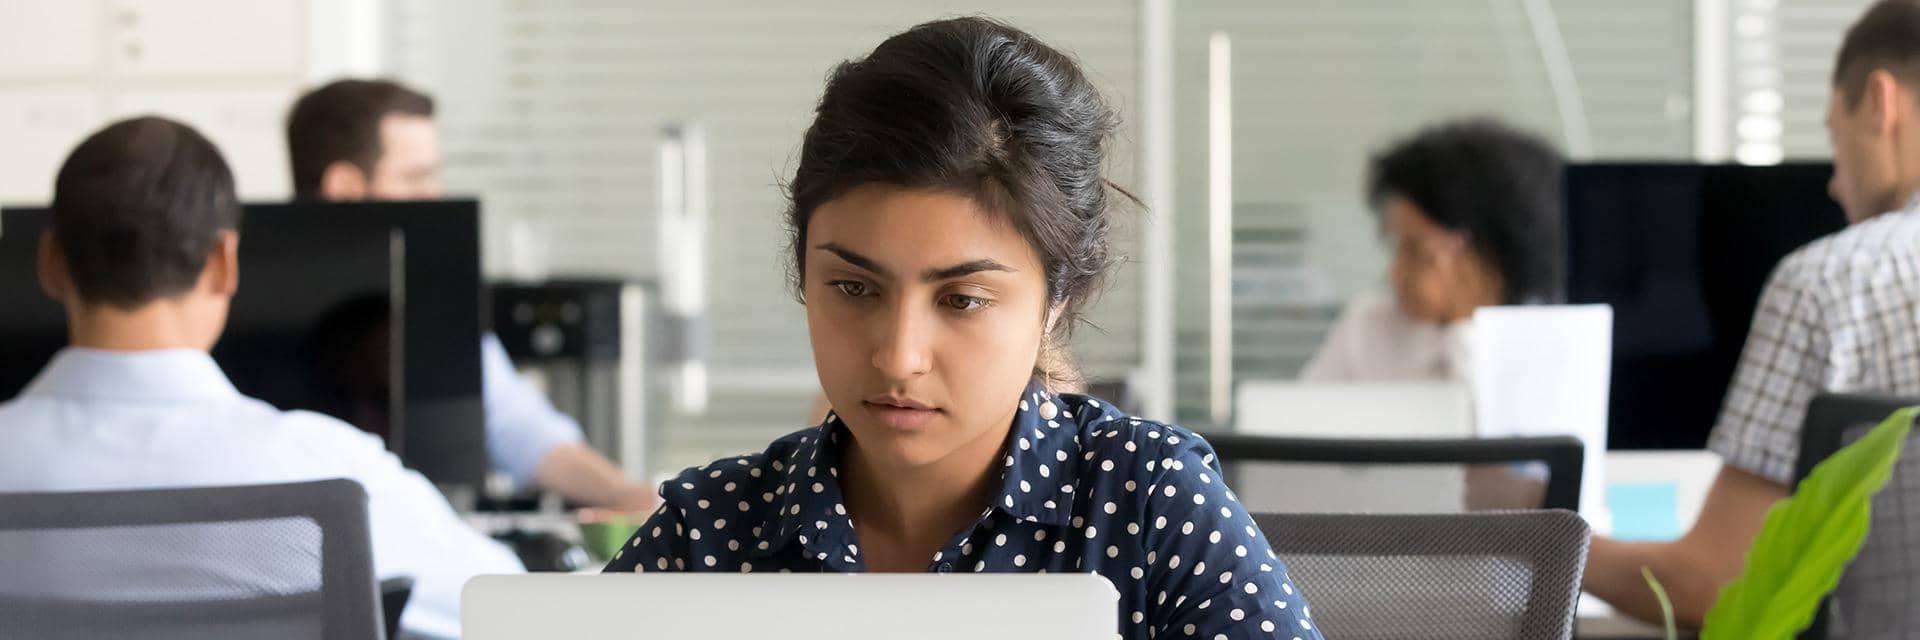 A woman staring at a computer screen. Confirmation of payee helps you confirm recipient details.
